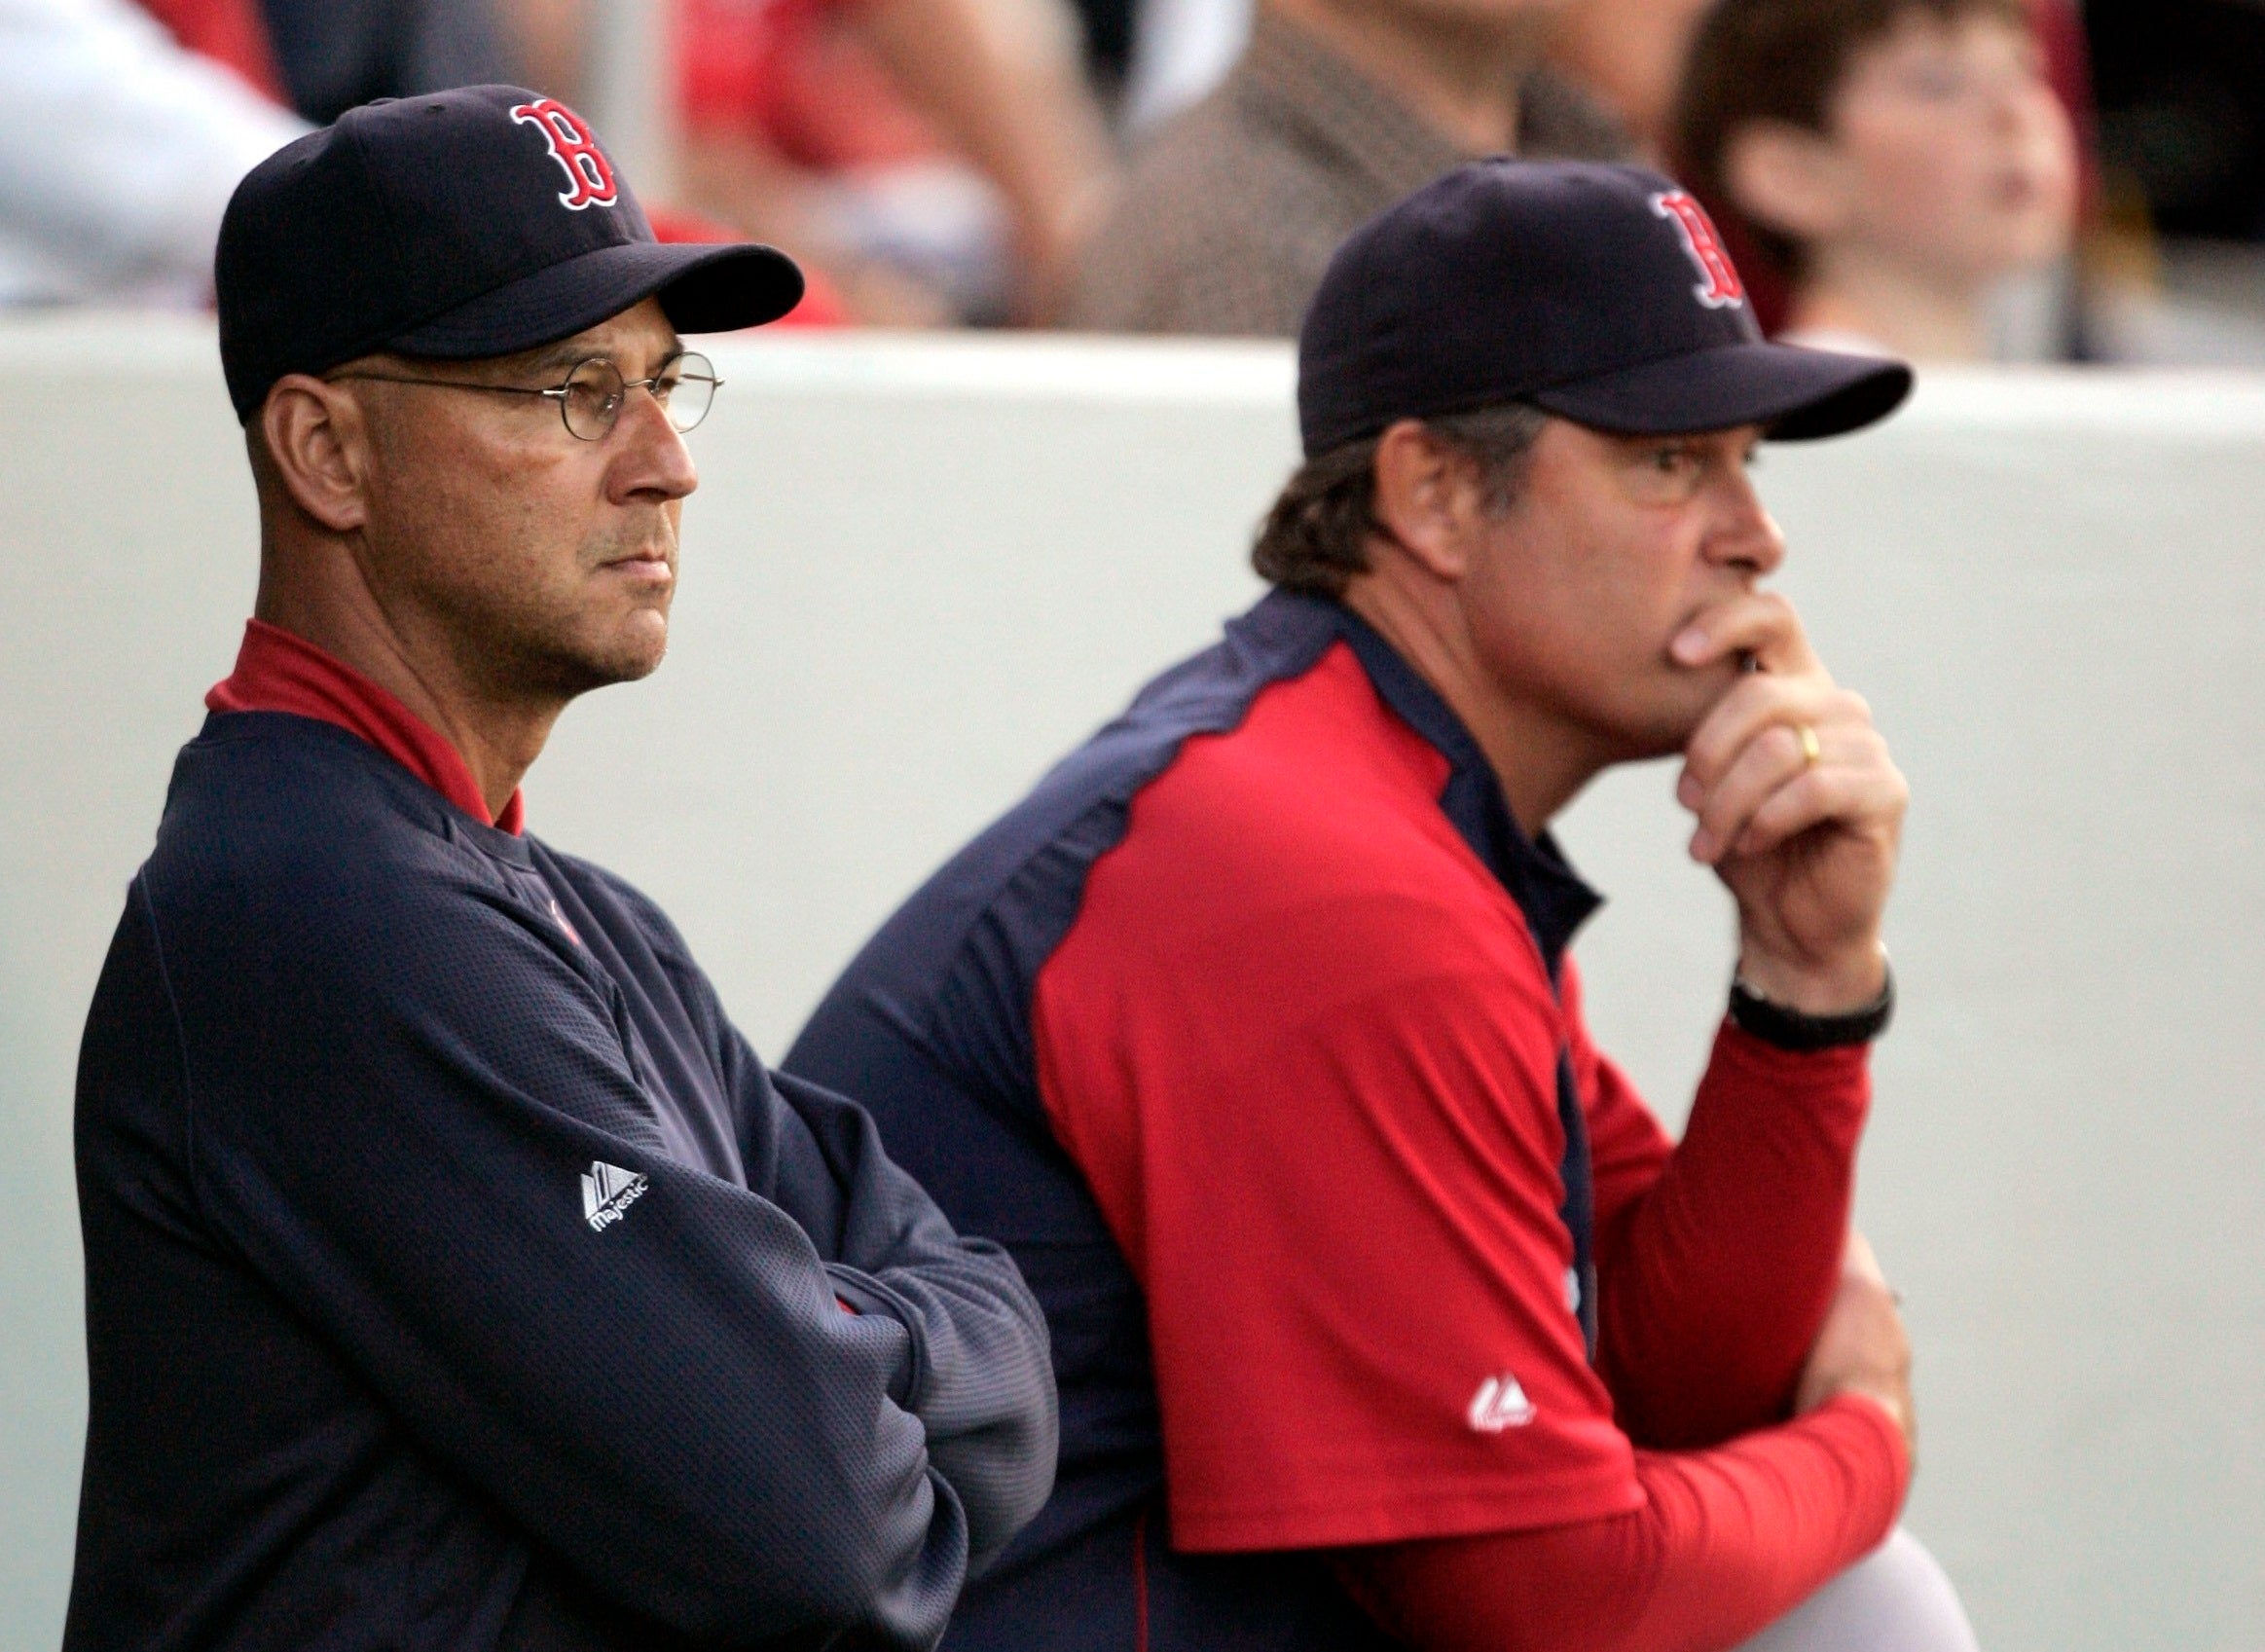 Terry Francona is accompanying John Farrell to chemotherapy